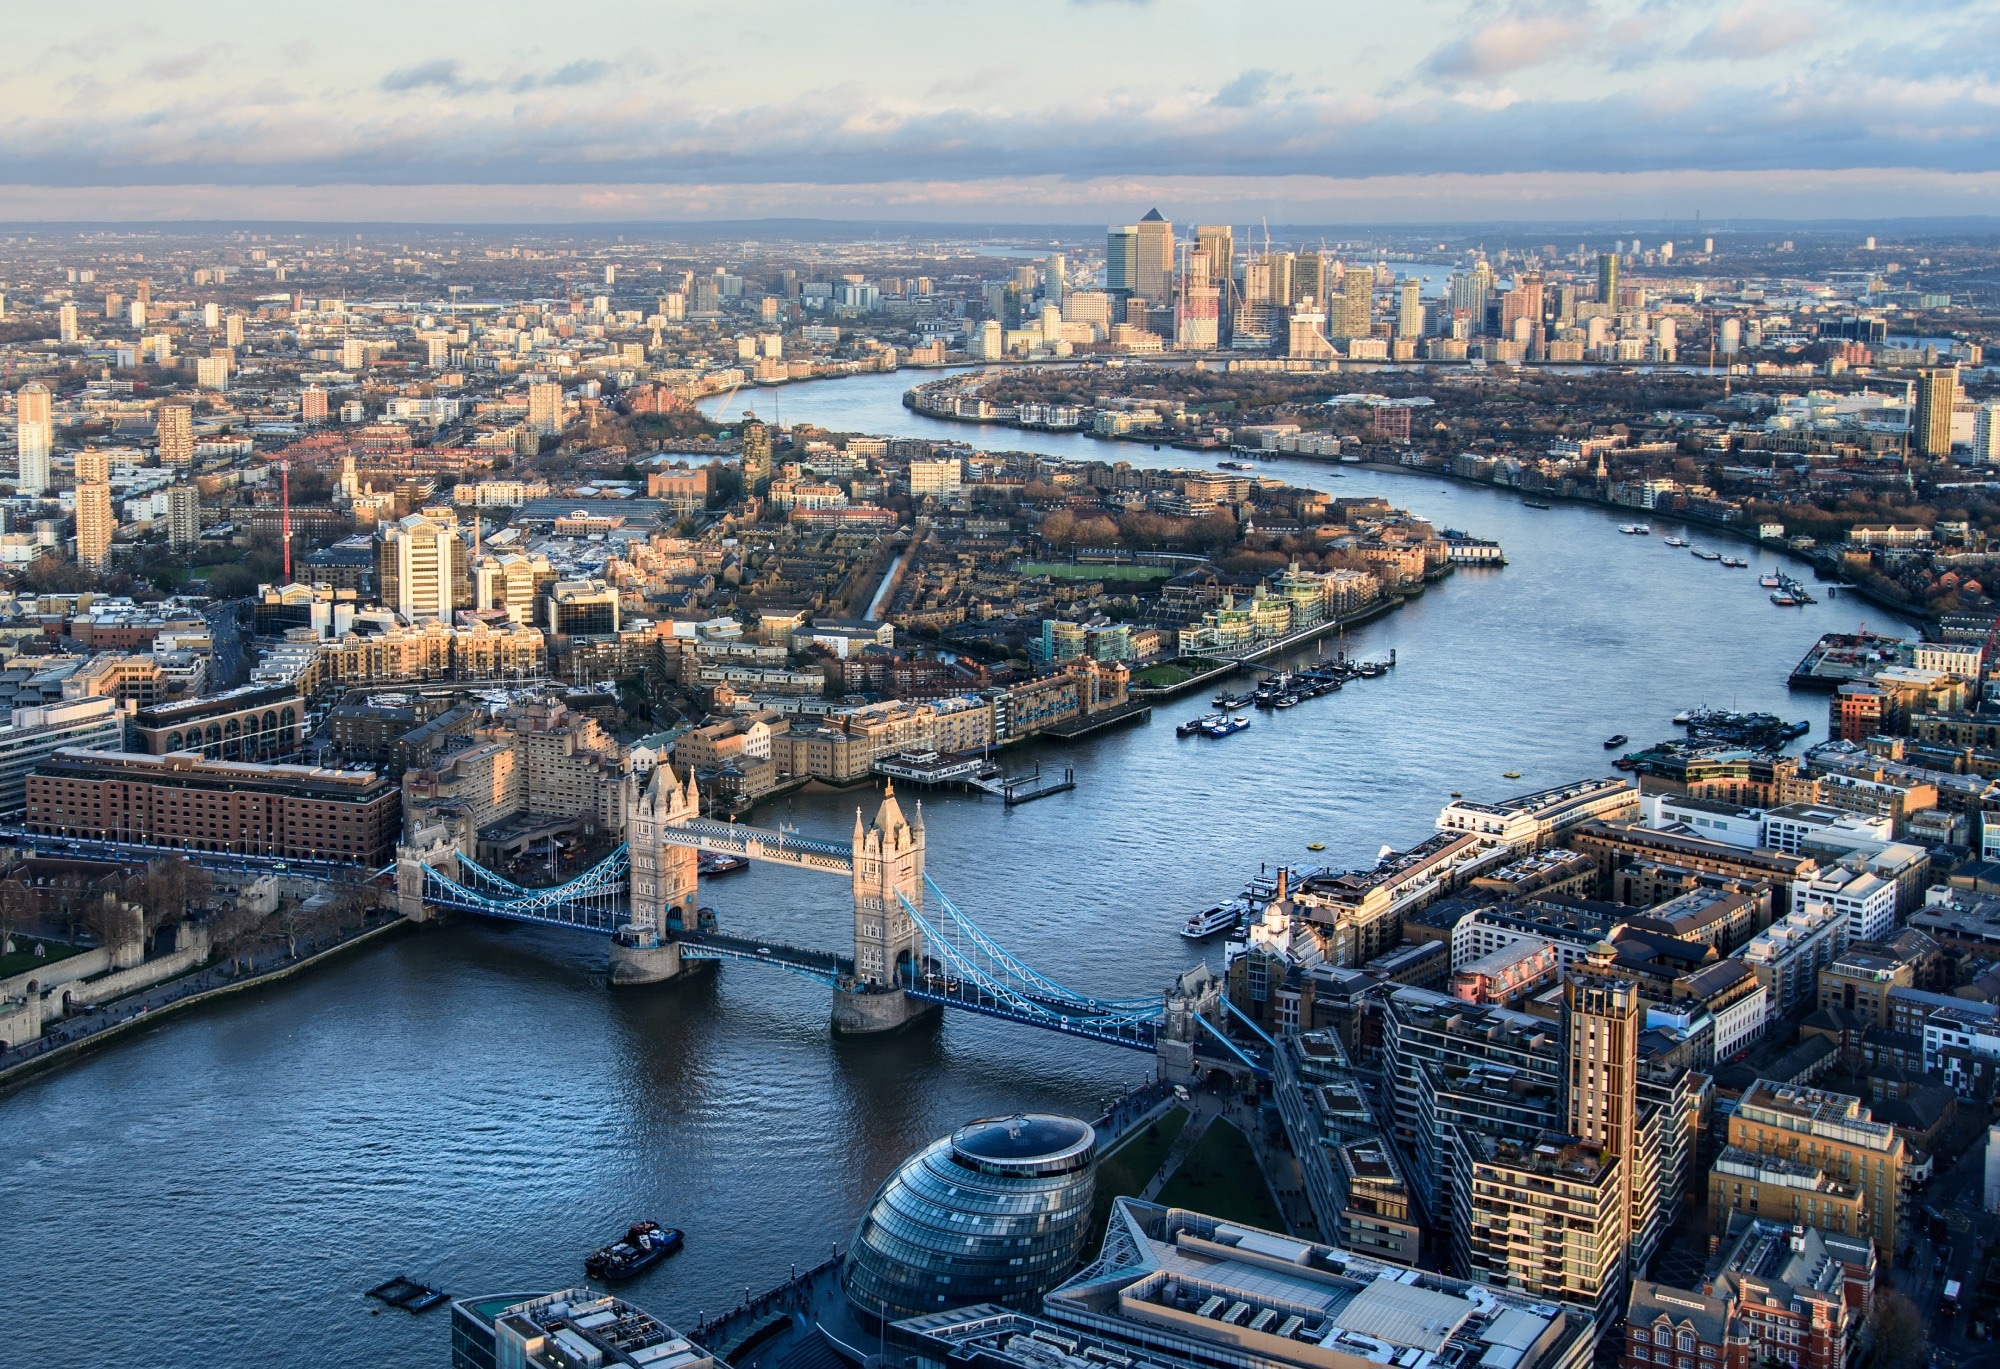 Study: A ONE-HEALTH ENVIRONMENTAL RISK ASSESSMENT OF CONTAMINANTS OF EMERGING CONCERN IN LONDON’S WATERWAYS THROUGHOUT THE SARS-CoV-2 PANDEMIC. Image Credit: Csaba Peterdi/Shutterstock.com